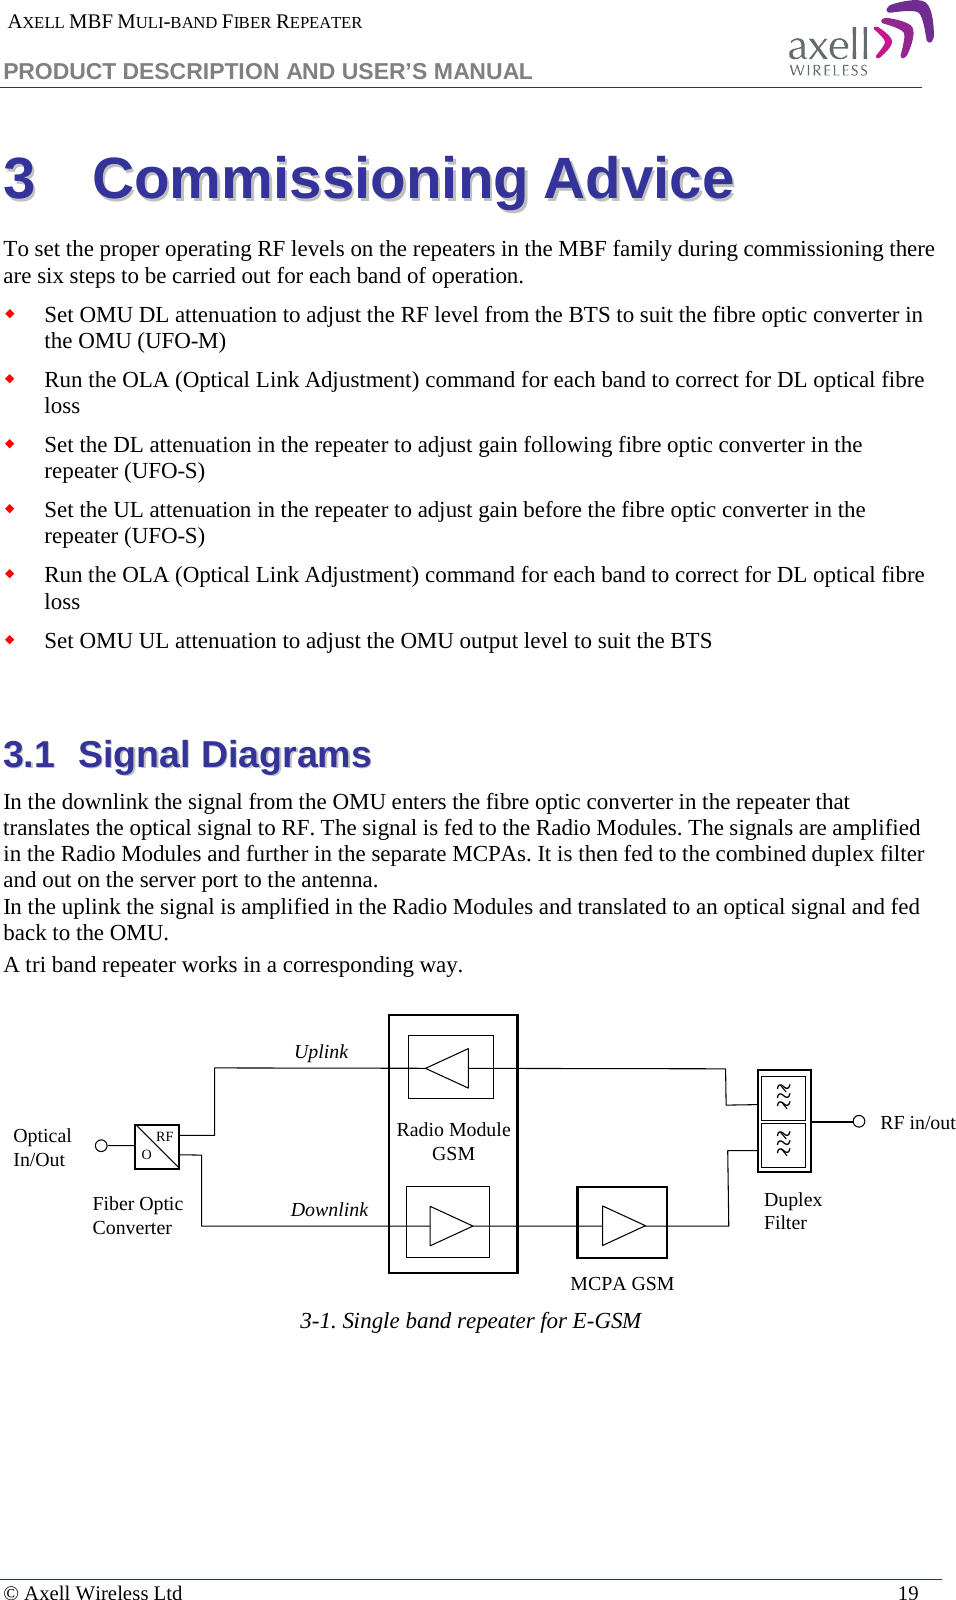  AXELL MBF MULI-BAND FIBER REPEATER PRODUCT DESCRIPTION AND USER’S MANUAL   © Axell Wireless Ltd    19 33  CCoommmmiissssiioonniinngg  AAddvviiccee  To set the proper operating RF levels on the repeaters in the MBF family during commissioning there are six steps to be carried out for each band of operation.  Set OMU DL attenuation to adjust the RF level from the BTS to suit the fibre optic converter in the OMU (UFO-M)  Run the OLA (Optical Link Adjustment) command for each band to correct for DL optical fibre loss  Set the DL attenuation in the repeater to adjust gain following fibre optic converter in the repeater (UFO-S)  Set the UL attenuation in the repeater to adjust gain before the fibre optic converter in the repeater (UFO-S)  Run the OLA (Optical Link Adjustment) command for each band to correct for DL optical fibre loss  Set OMU UL attenuation to adjust the OMU output level to suit the BTS     33..11  SSiiggnnaall  DDiiaaggrraammss    In the downlink the signal from the OMU enters the fibre optic converter in the repeater that translates the optical signal to RF. The signal is fed to the Radio Modules. The signals are amplified in the Radio Modules and further in the separate MCPAs. It is then fed to the combined duplex filter and out on the server port to the antenna. In the uplink the signal is amplified in the Radio Modules and translated to an optical signal and fed back to the OMU.  A tri band repeater works in a corresponding way.    3-1. Single band repeater for E-GSM  Duplex FilterRFOOpticalIn/OutDownlinkRF in/outFiber OpticConverterRadio Module GSMMCPA GSMUplink~~~~~~~~~~~~